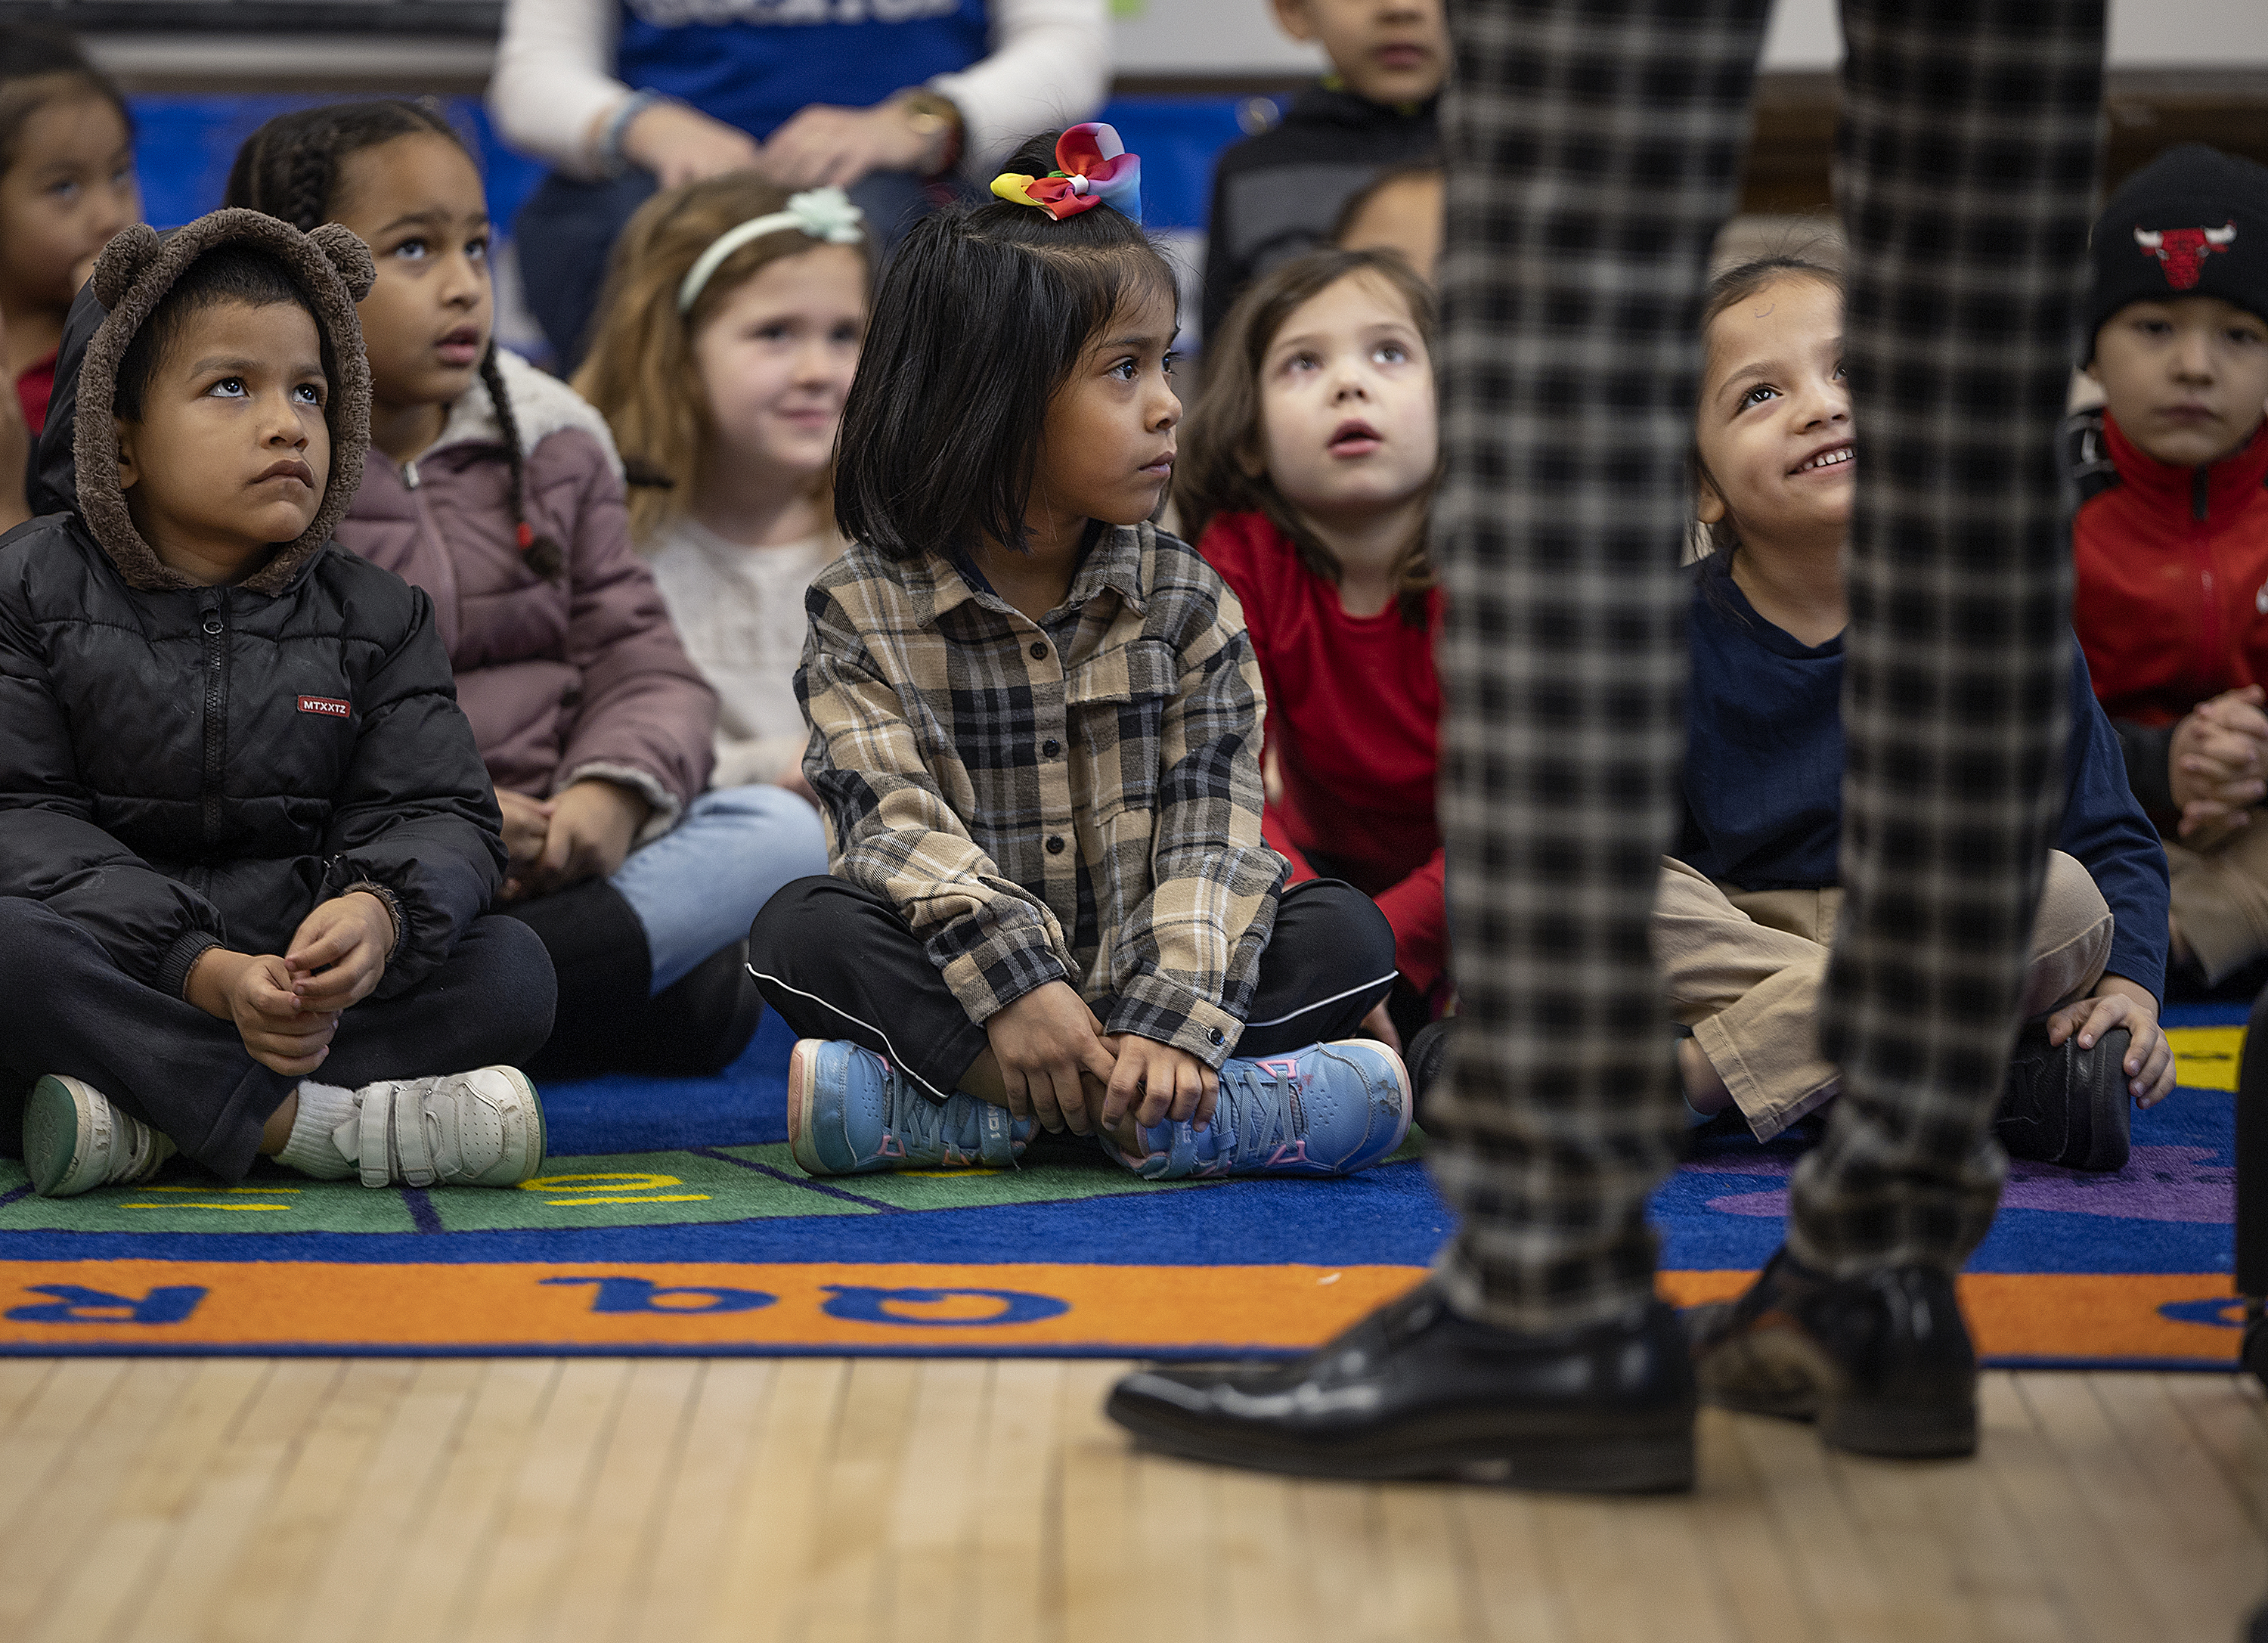 Kindergarteners at Emerson talked to board chair Collin Beachy. When it comes to Minneapolis Public Schools, “yes, the numbers are bad. The work is daunting,” Beachy said. “I know that. But I'm hopeful.“